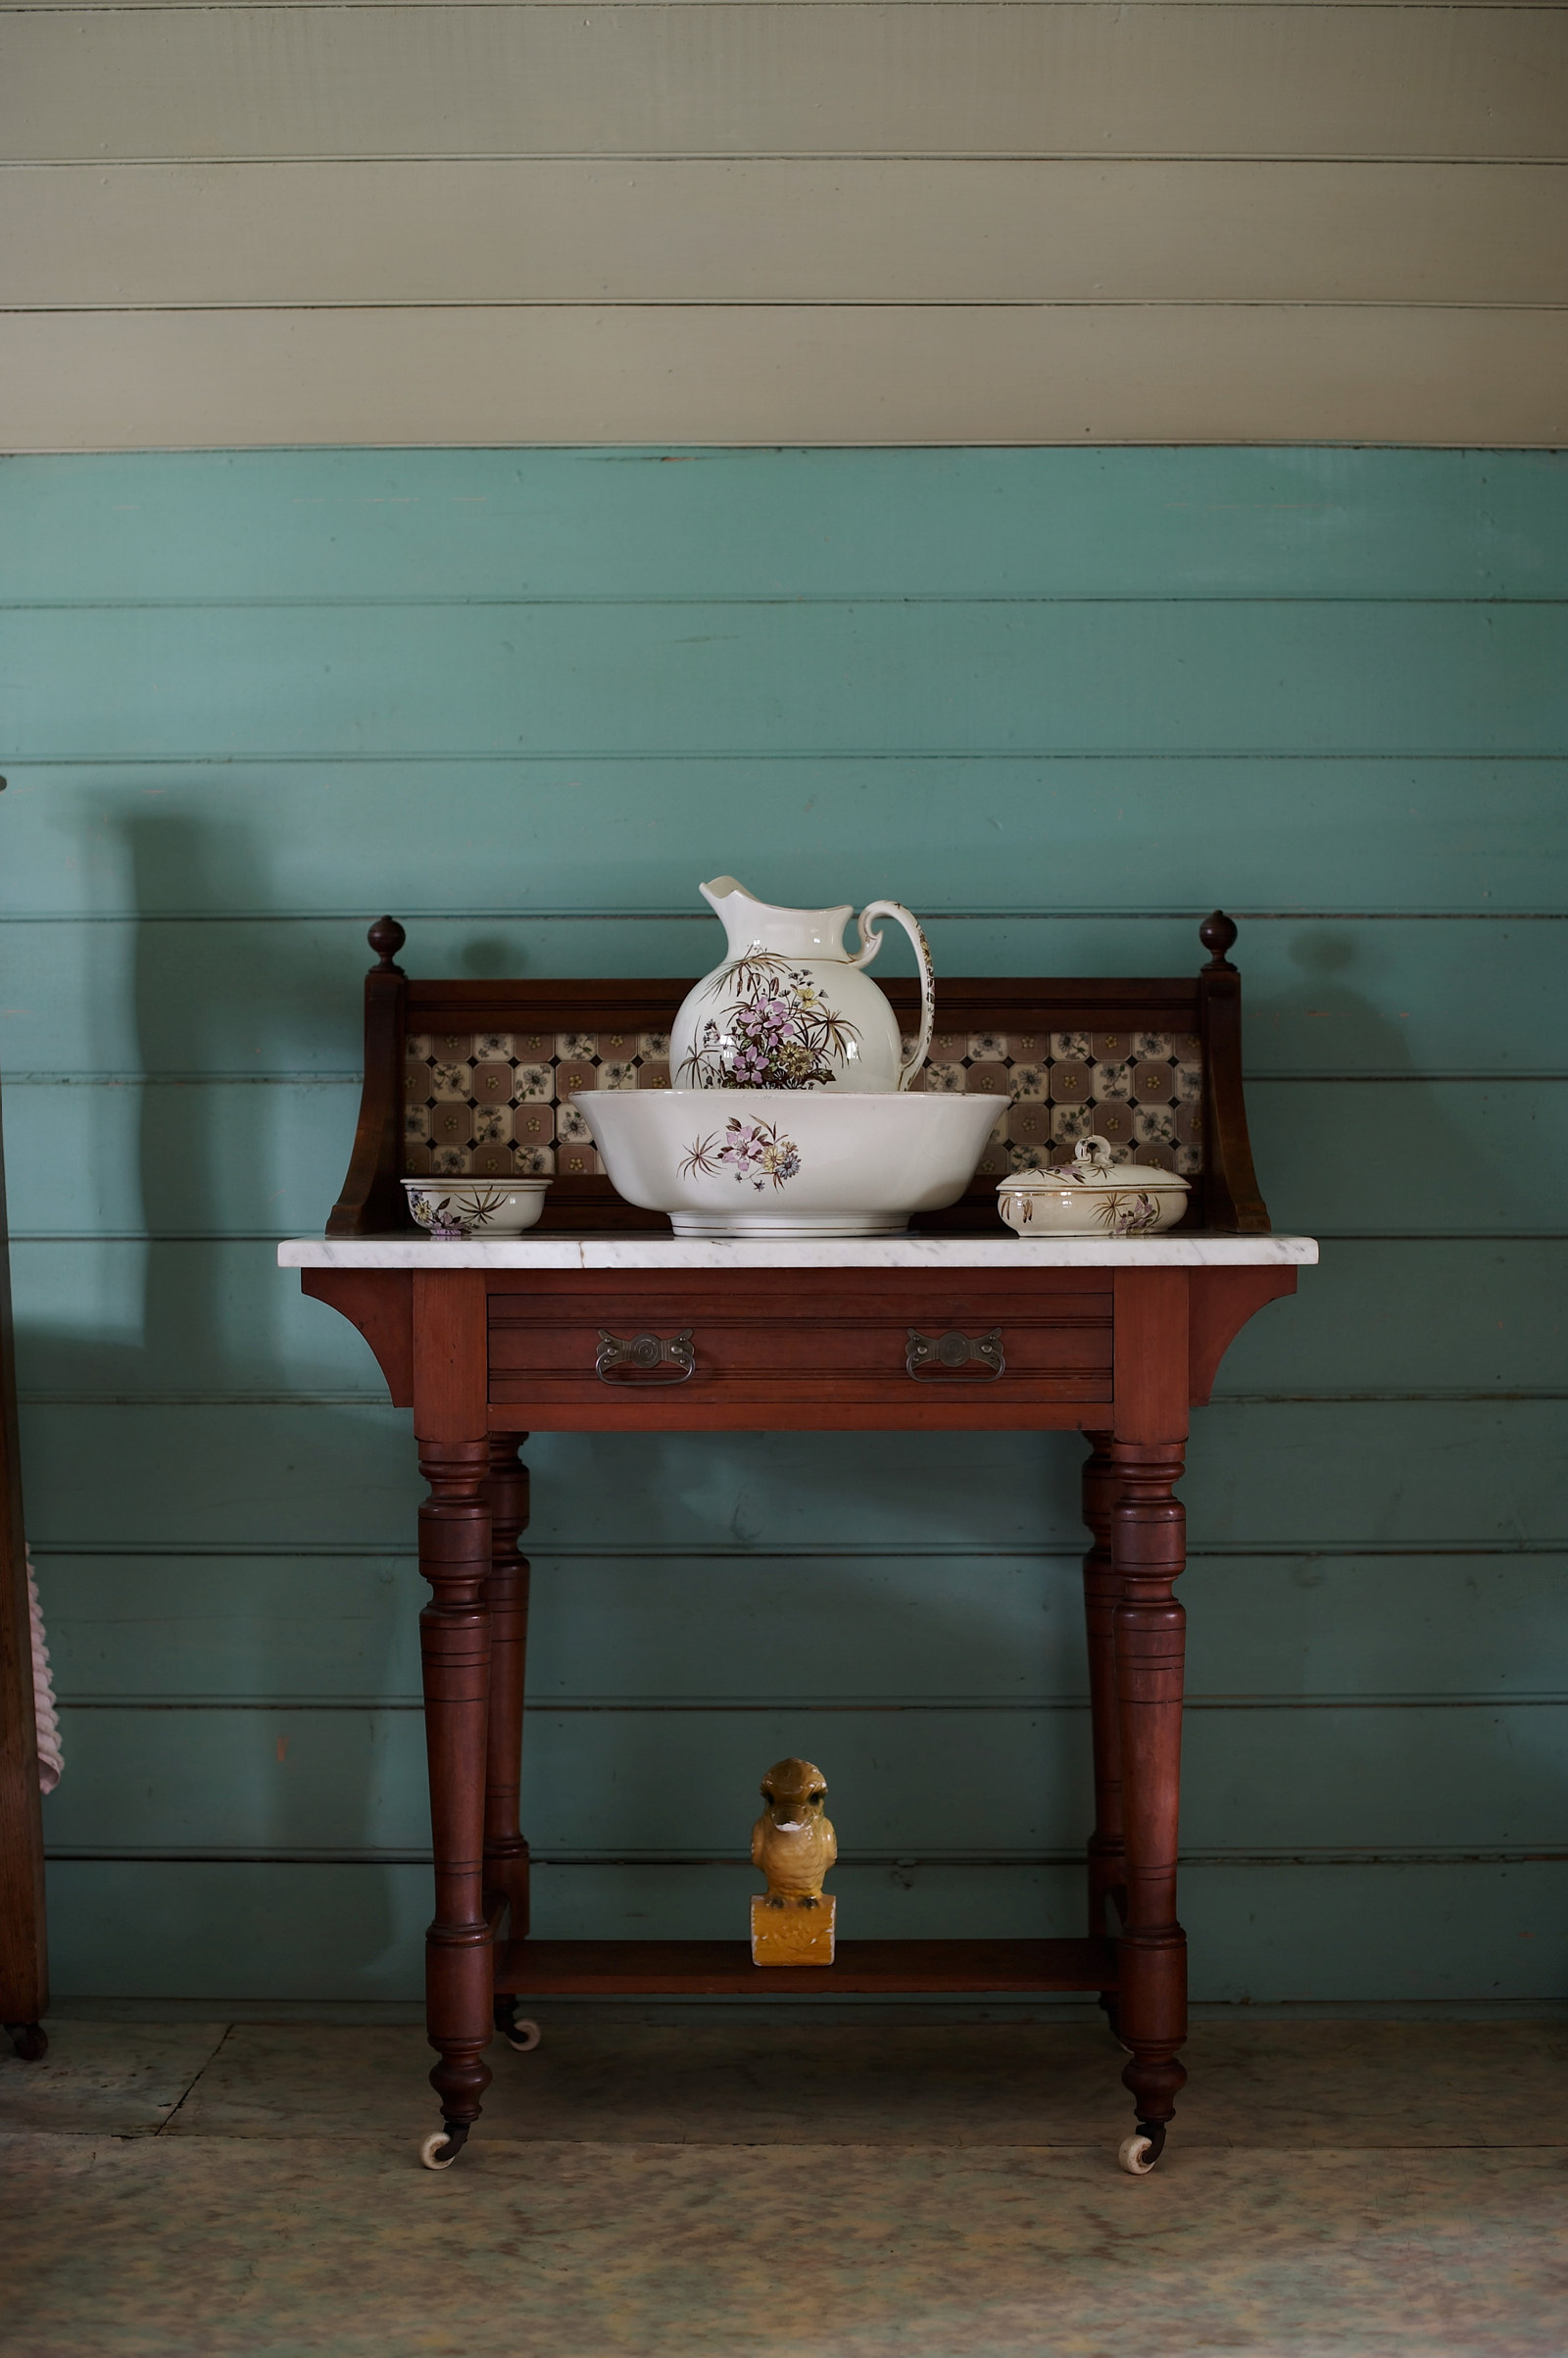 Washstand with toilet set in the little balcony bedroom, Meroogal